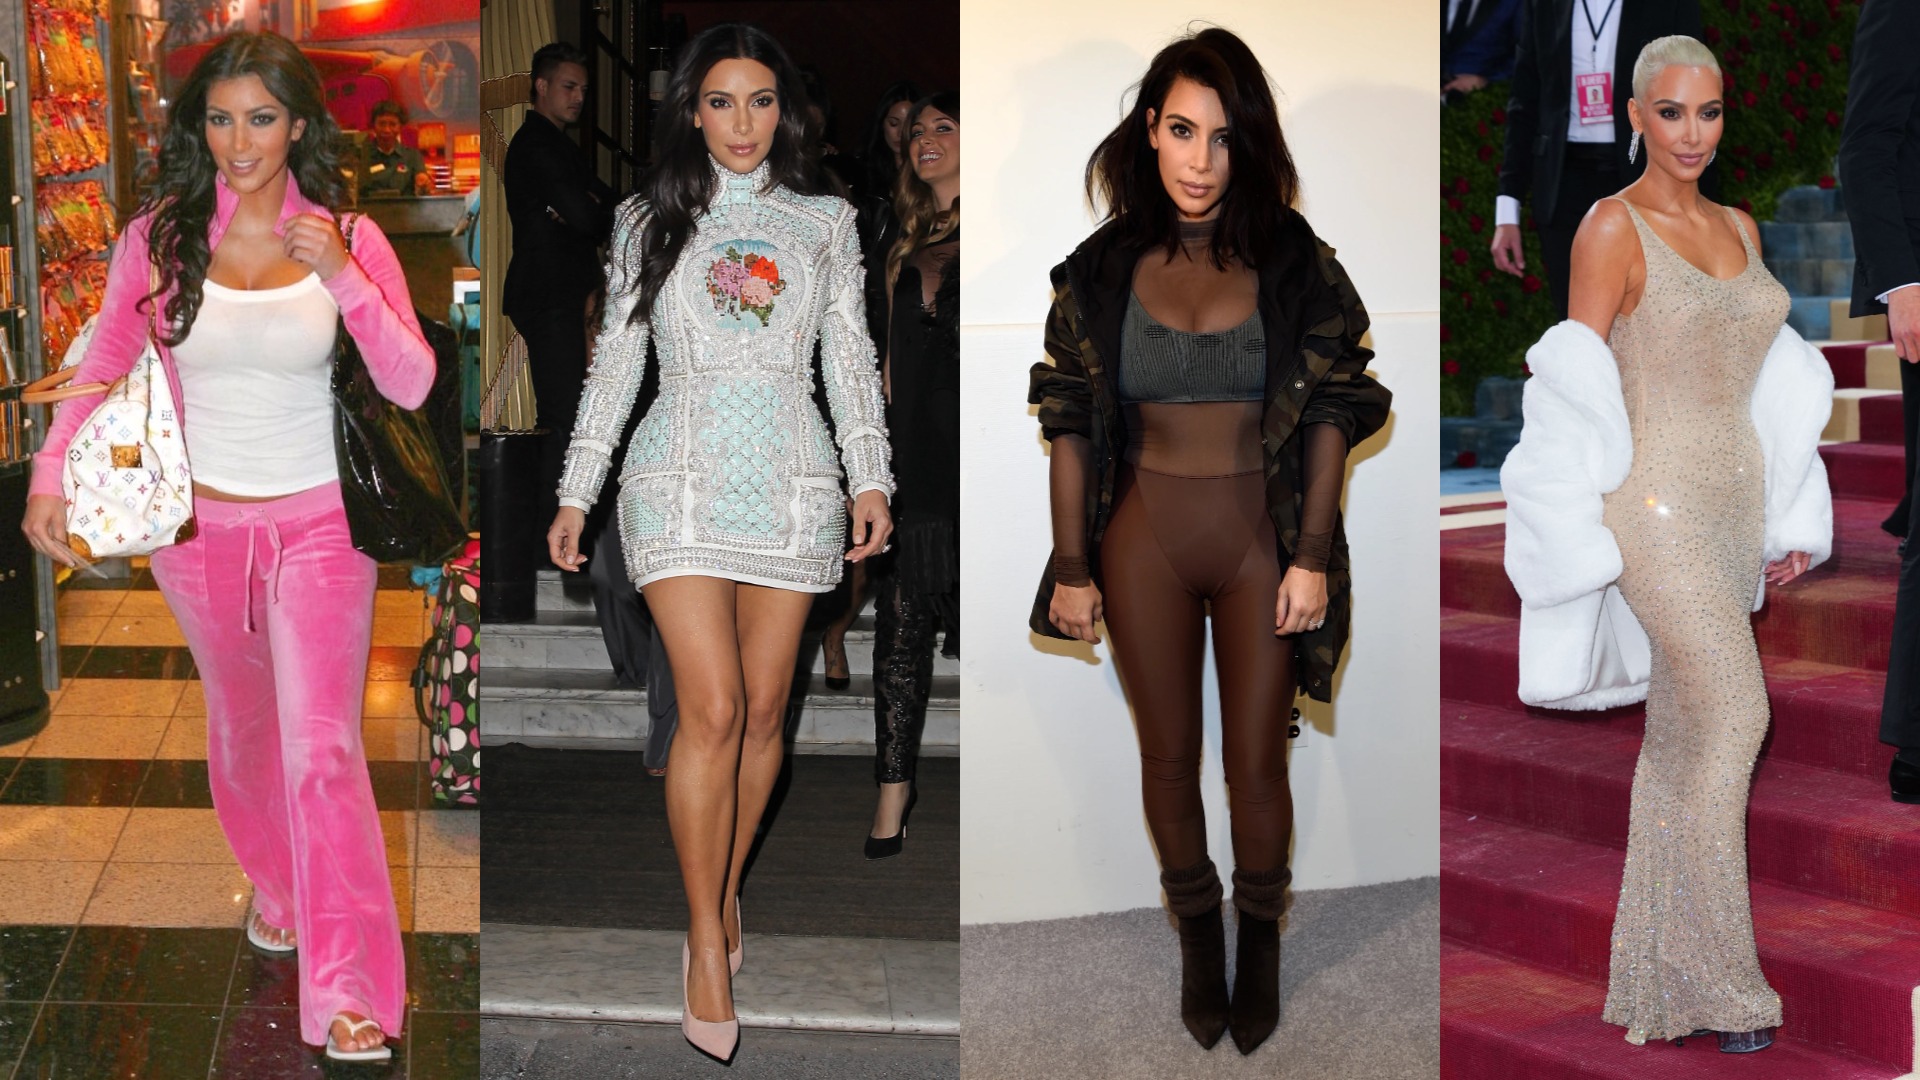 2010s fashion: Kim Kardashian's style of Juicy Couture tracksuits, Yeezy  athleisure and Balenciaga and Marilyn Monroe's dress at the Met Gala